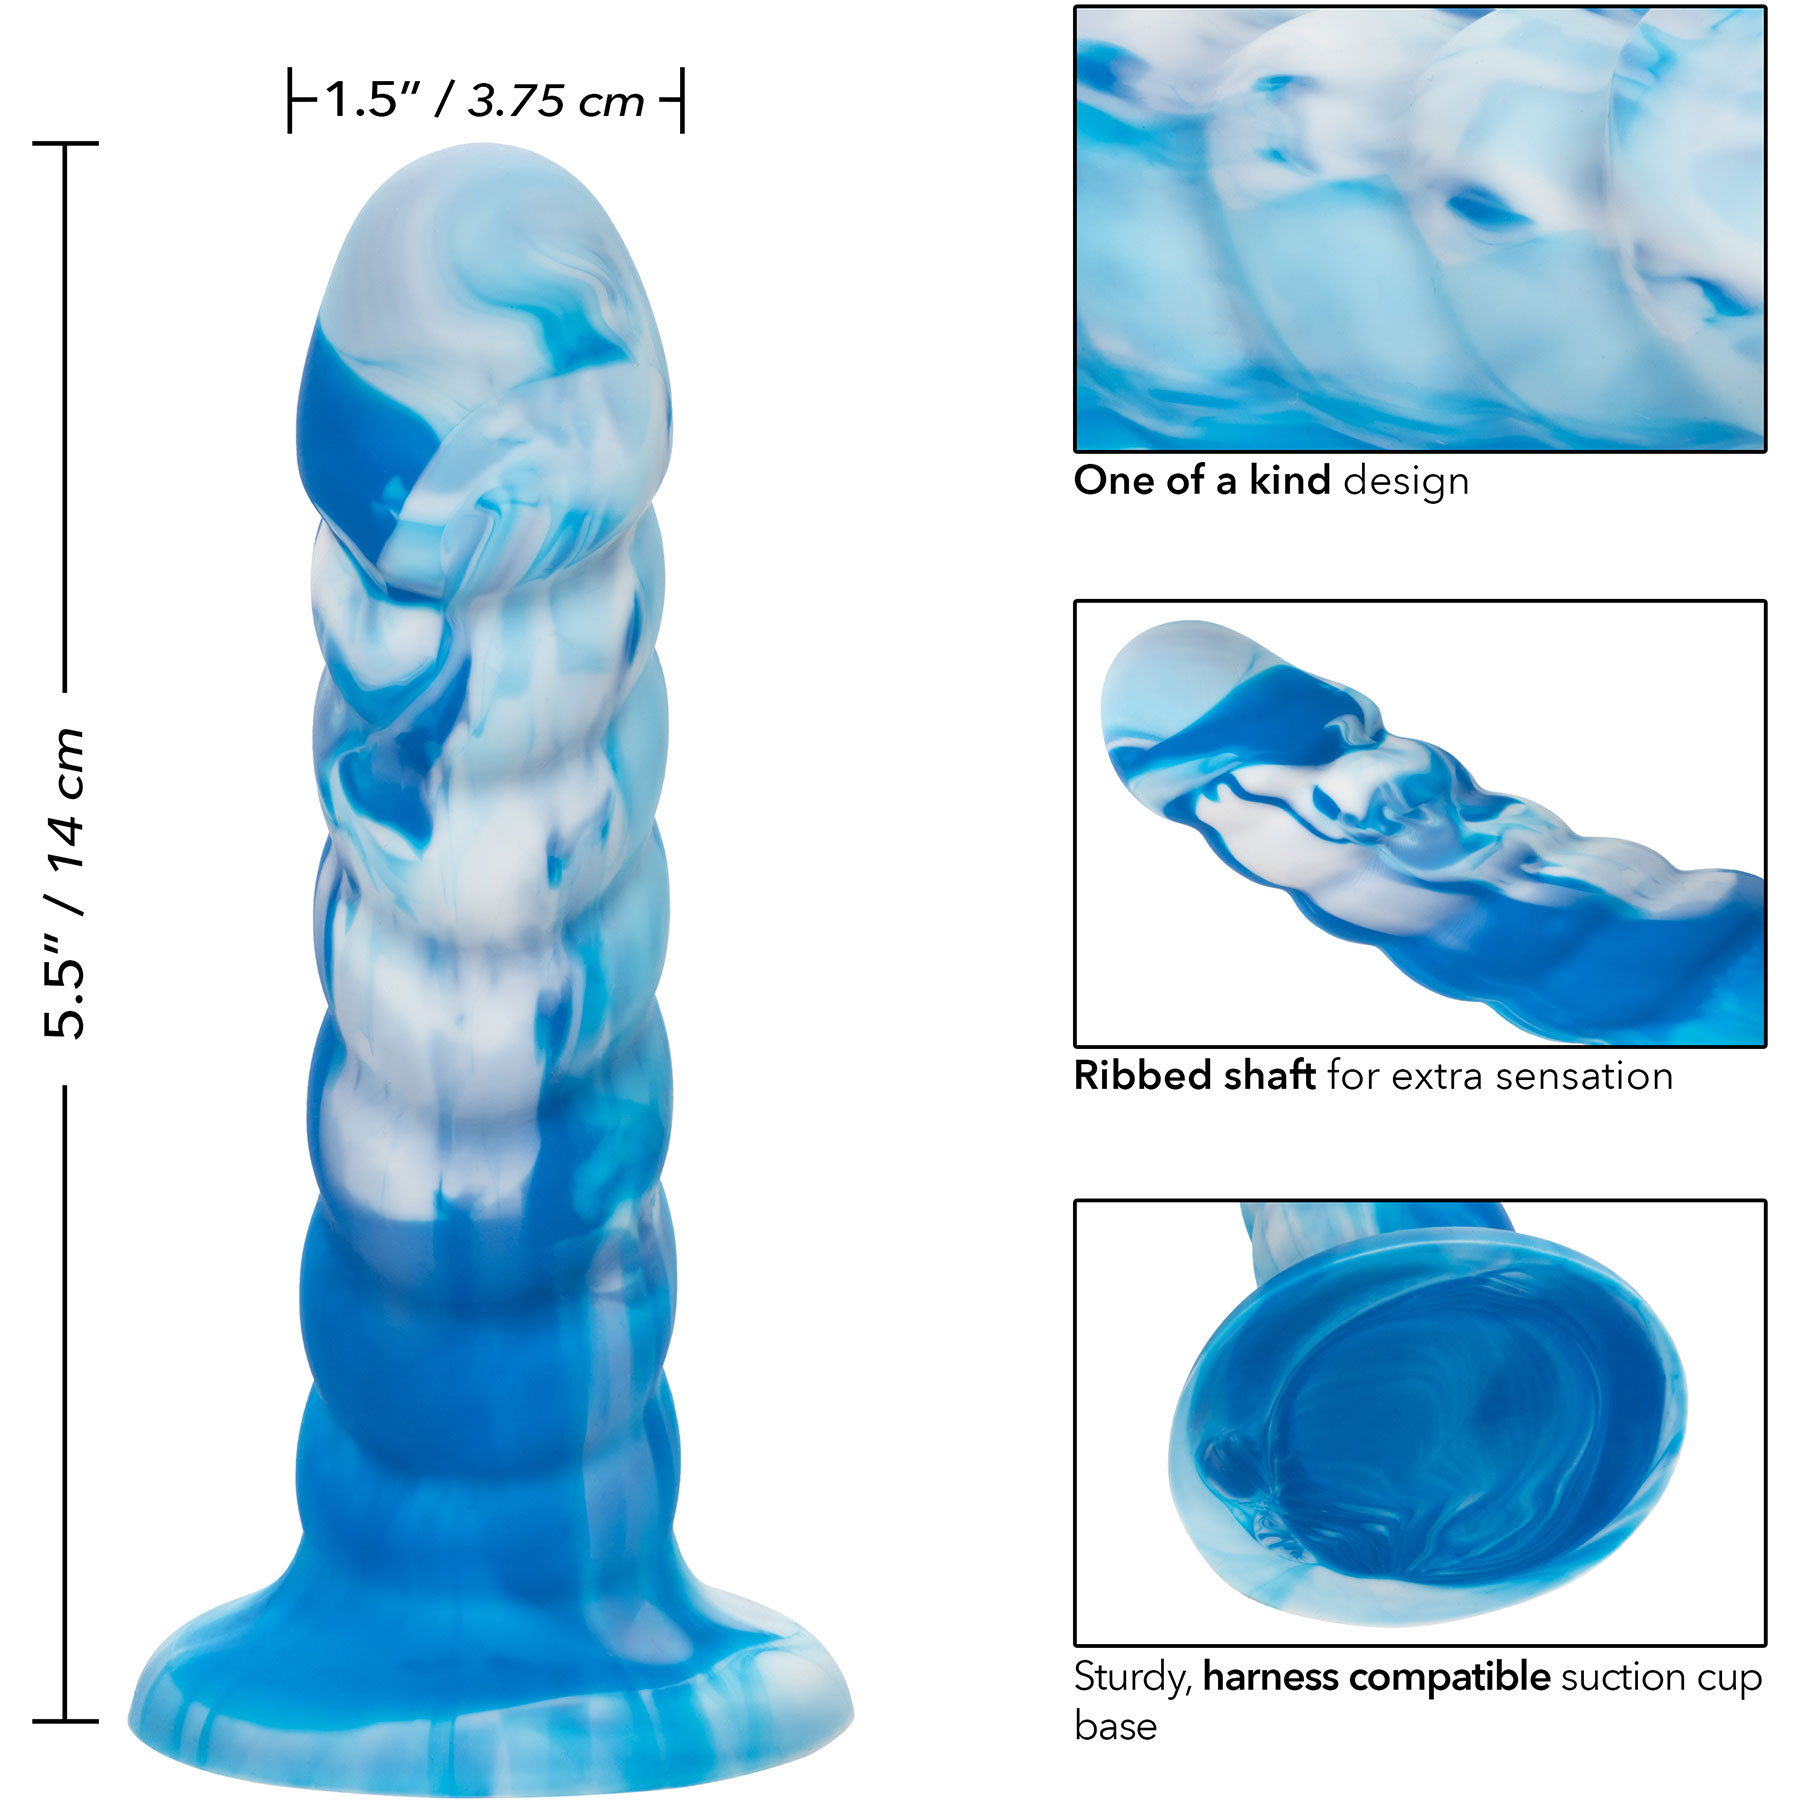 Twisted Love Twisted Ribbed Probe 5.5" Silicone Suction Cup Dildo - Measurements